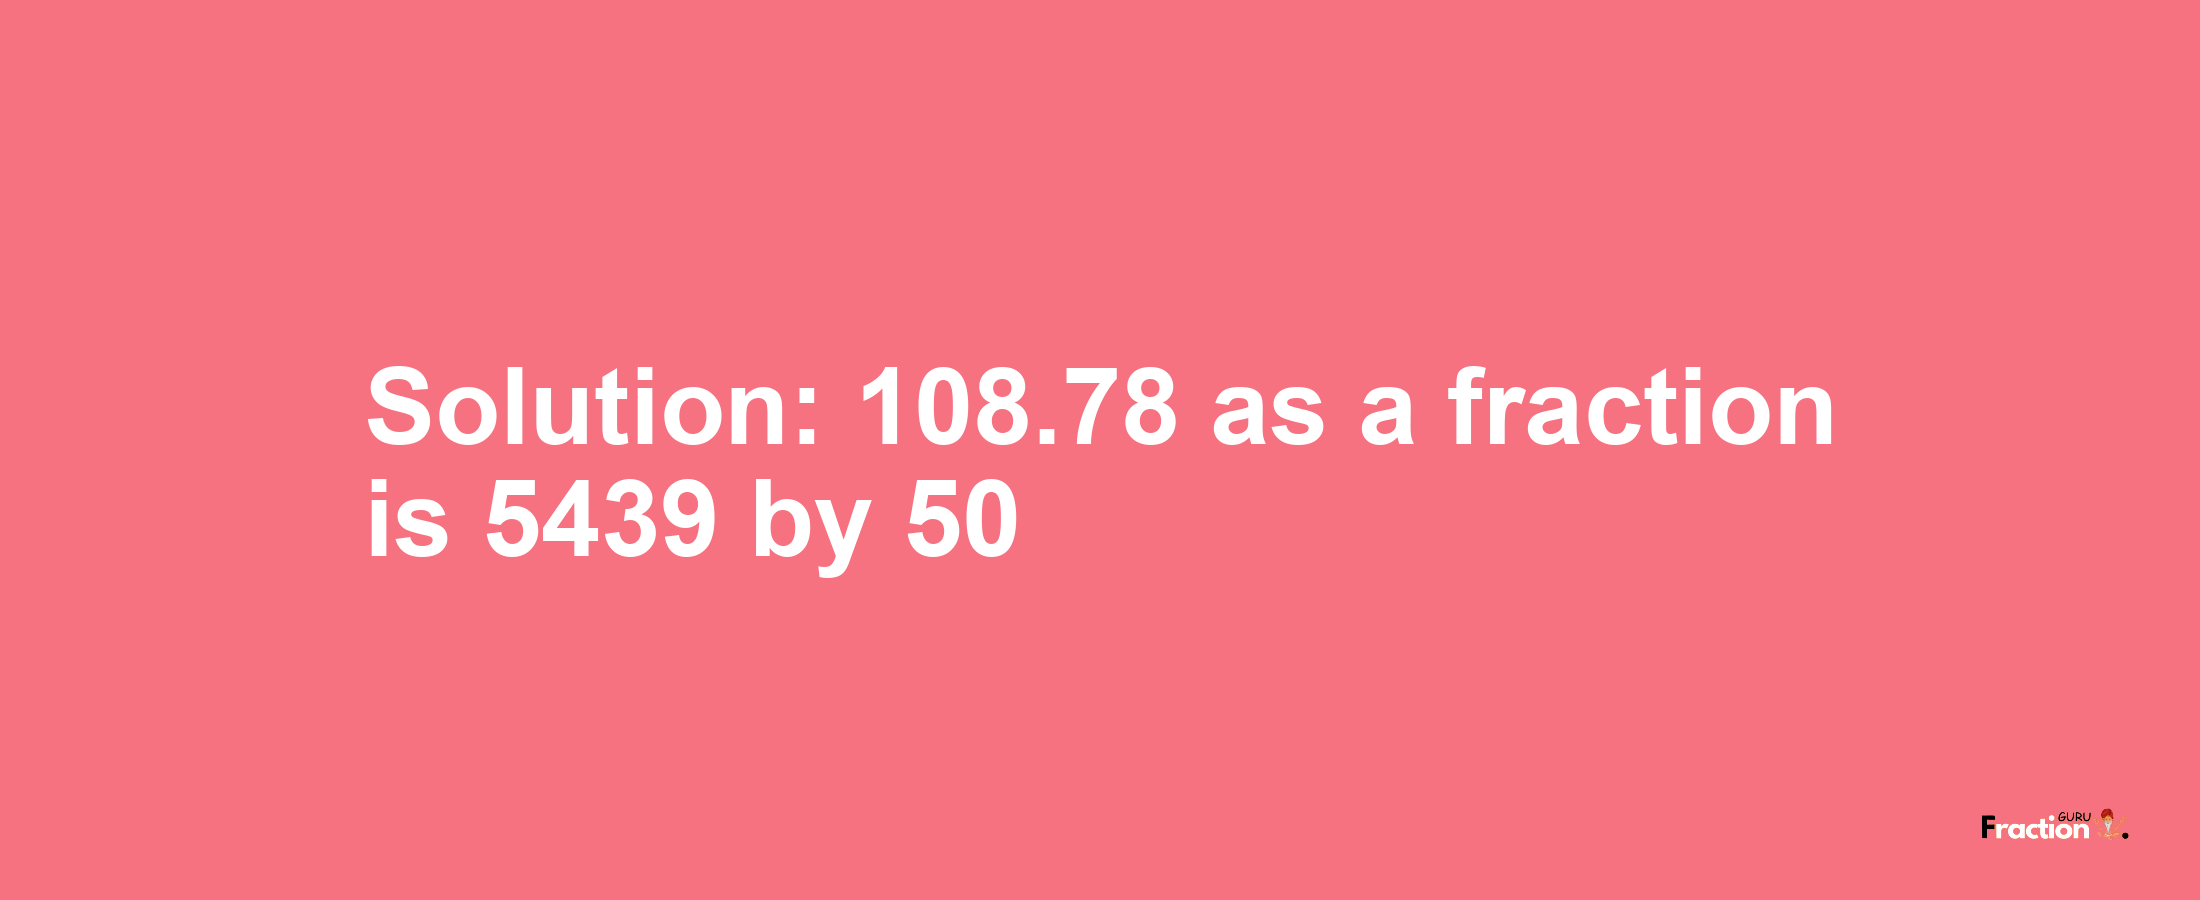 Solution:108.78 as a fraction is 5439/50